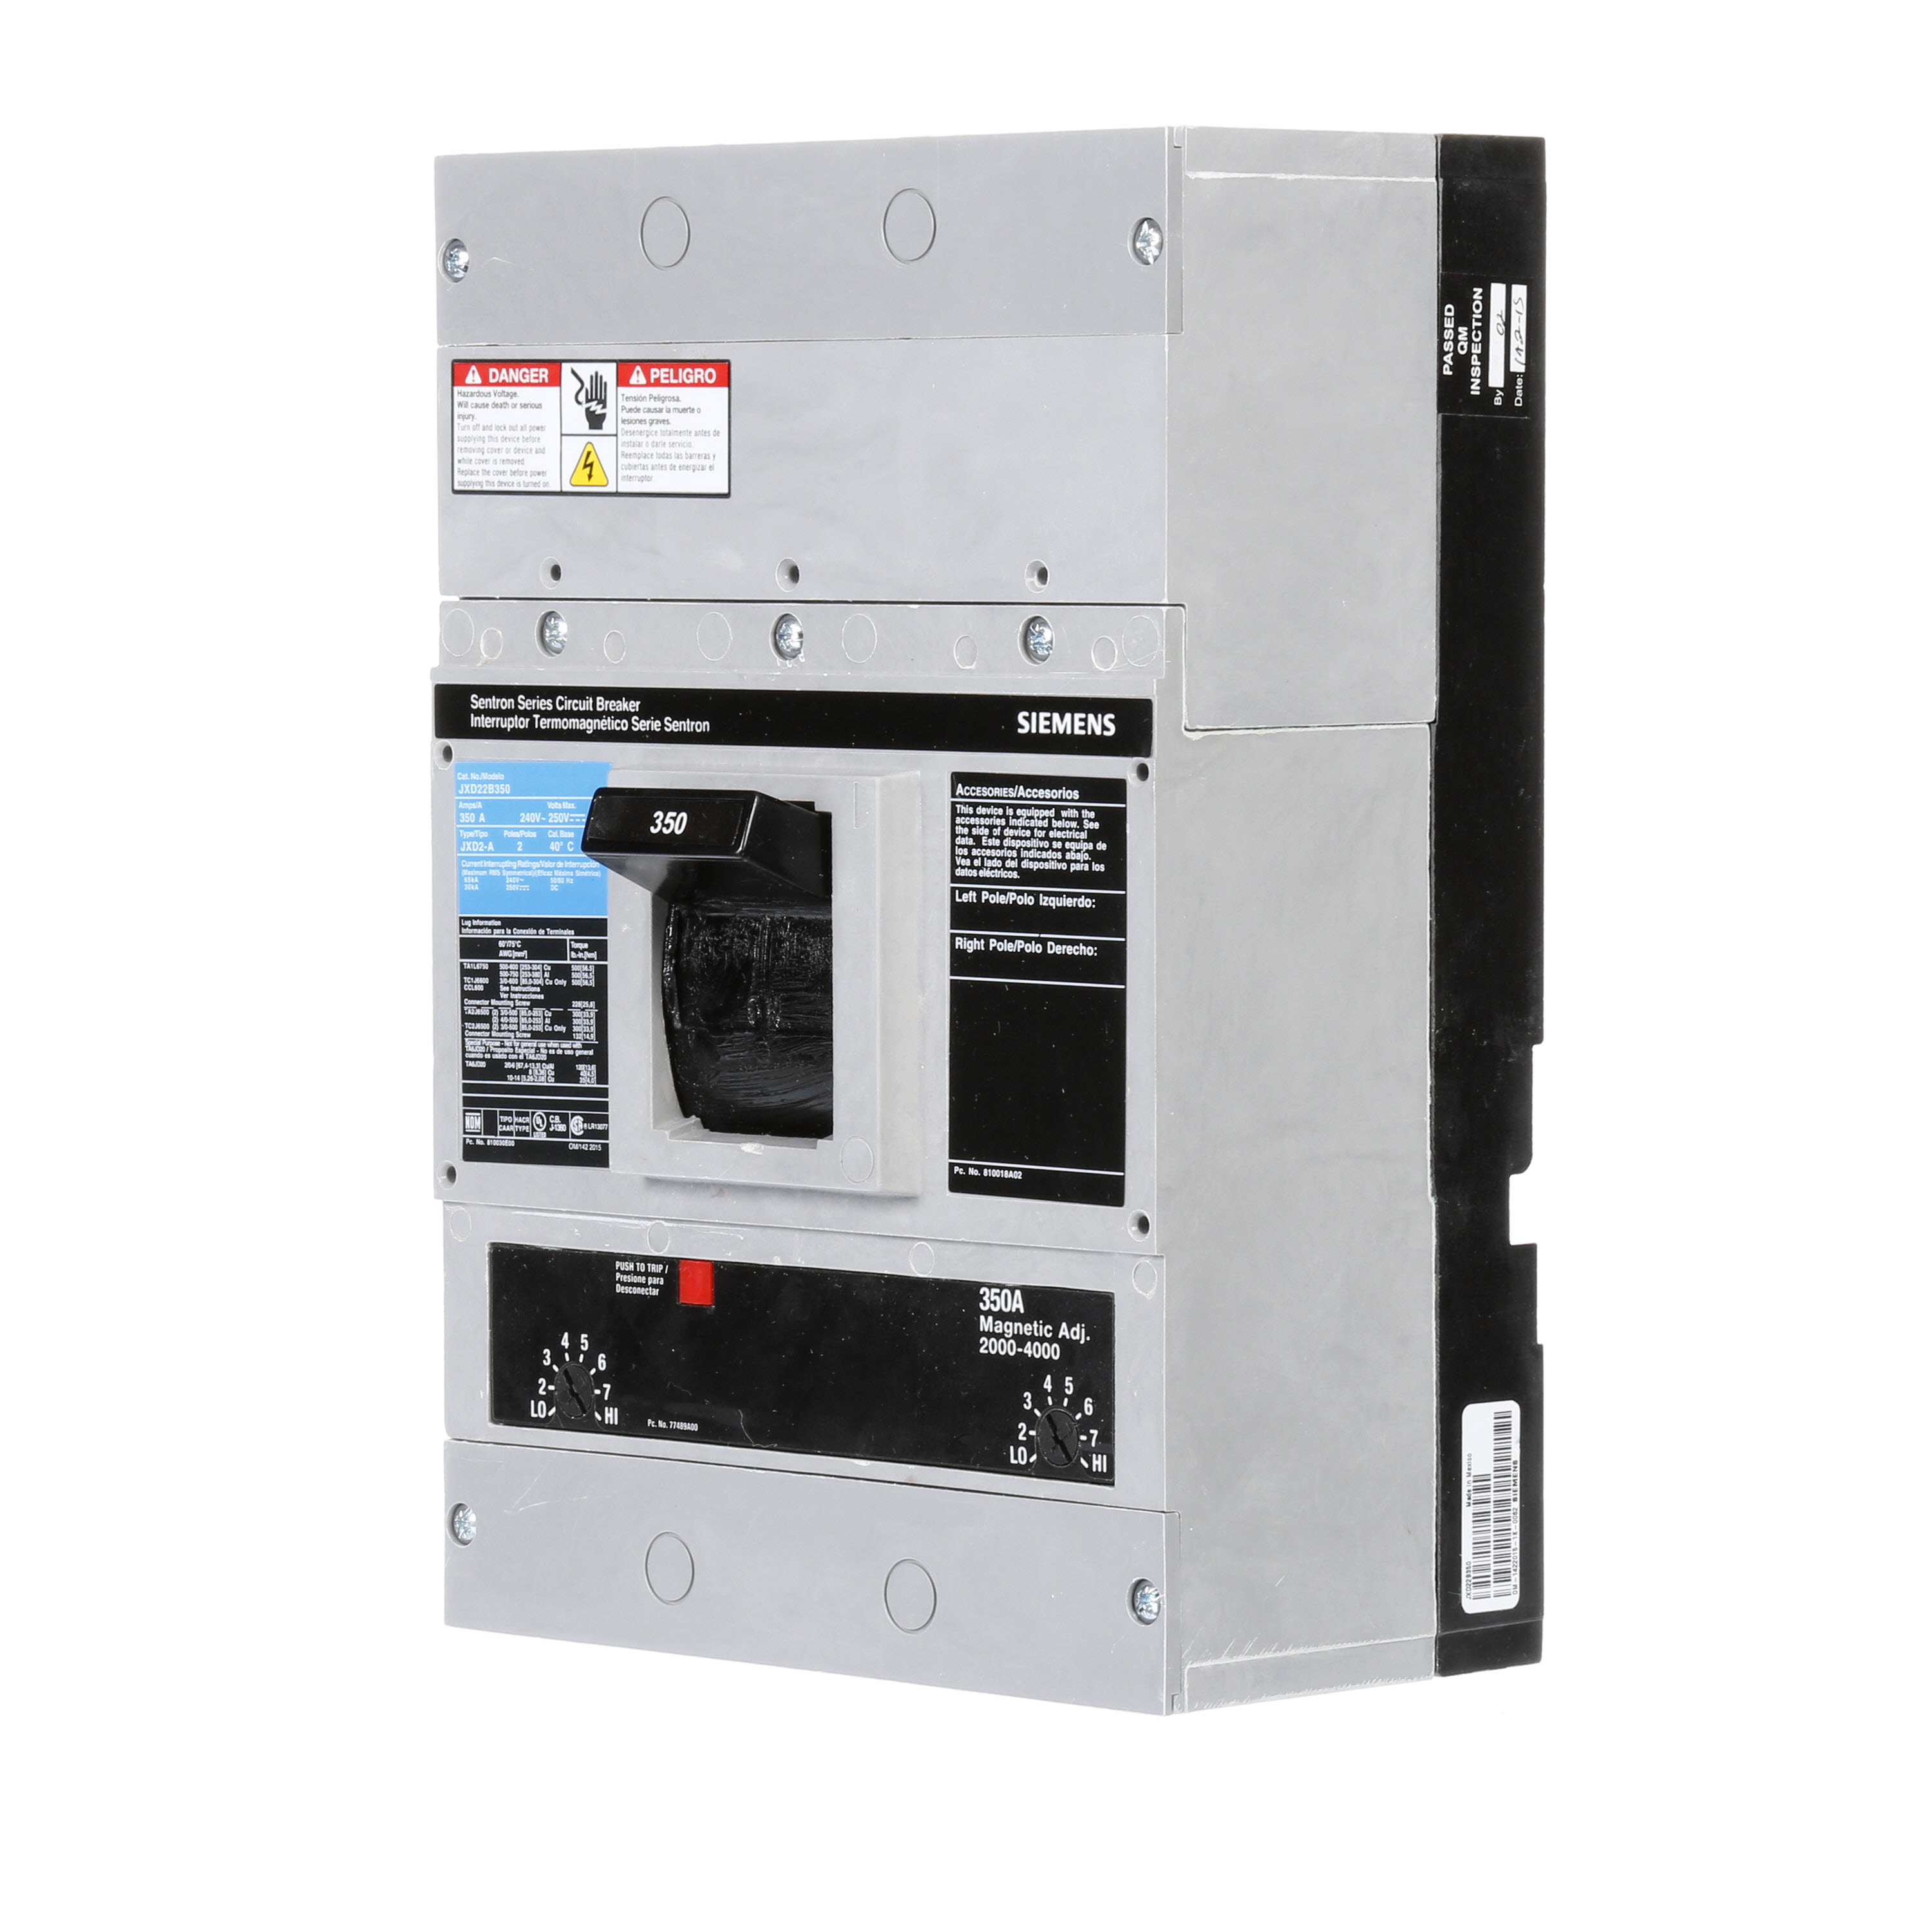 SIEMENS LOW VOLTAGE SENTRON MOLDED CASE CIRCUIT BREAKER WITH THERMAL - MAGNETICTRIP UNIT. ASSEMBLED STANDARD 40 DEG C BREAKER JD FRAME WITH STANDARD BREAKING CAPACITY. 350A 2-POLE (65KAIC AT 240V). NON-INTERCHANGEABLE TRIP UNIT. SPECIAL FEATURES NO LUGS INSTALLED. DIMENSIONS (W x H x D) IN 7.50 x 11.0 x 4.00.